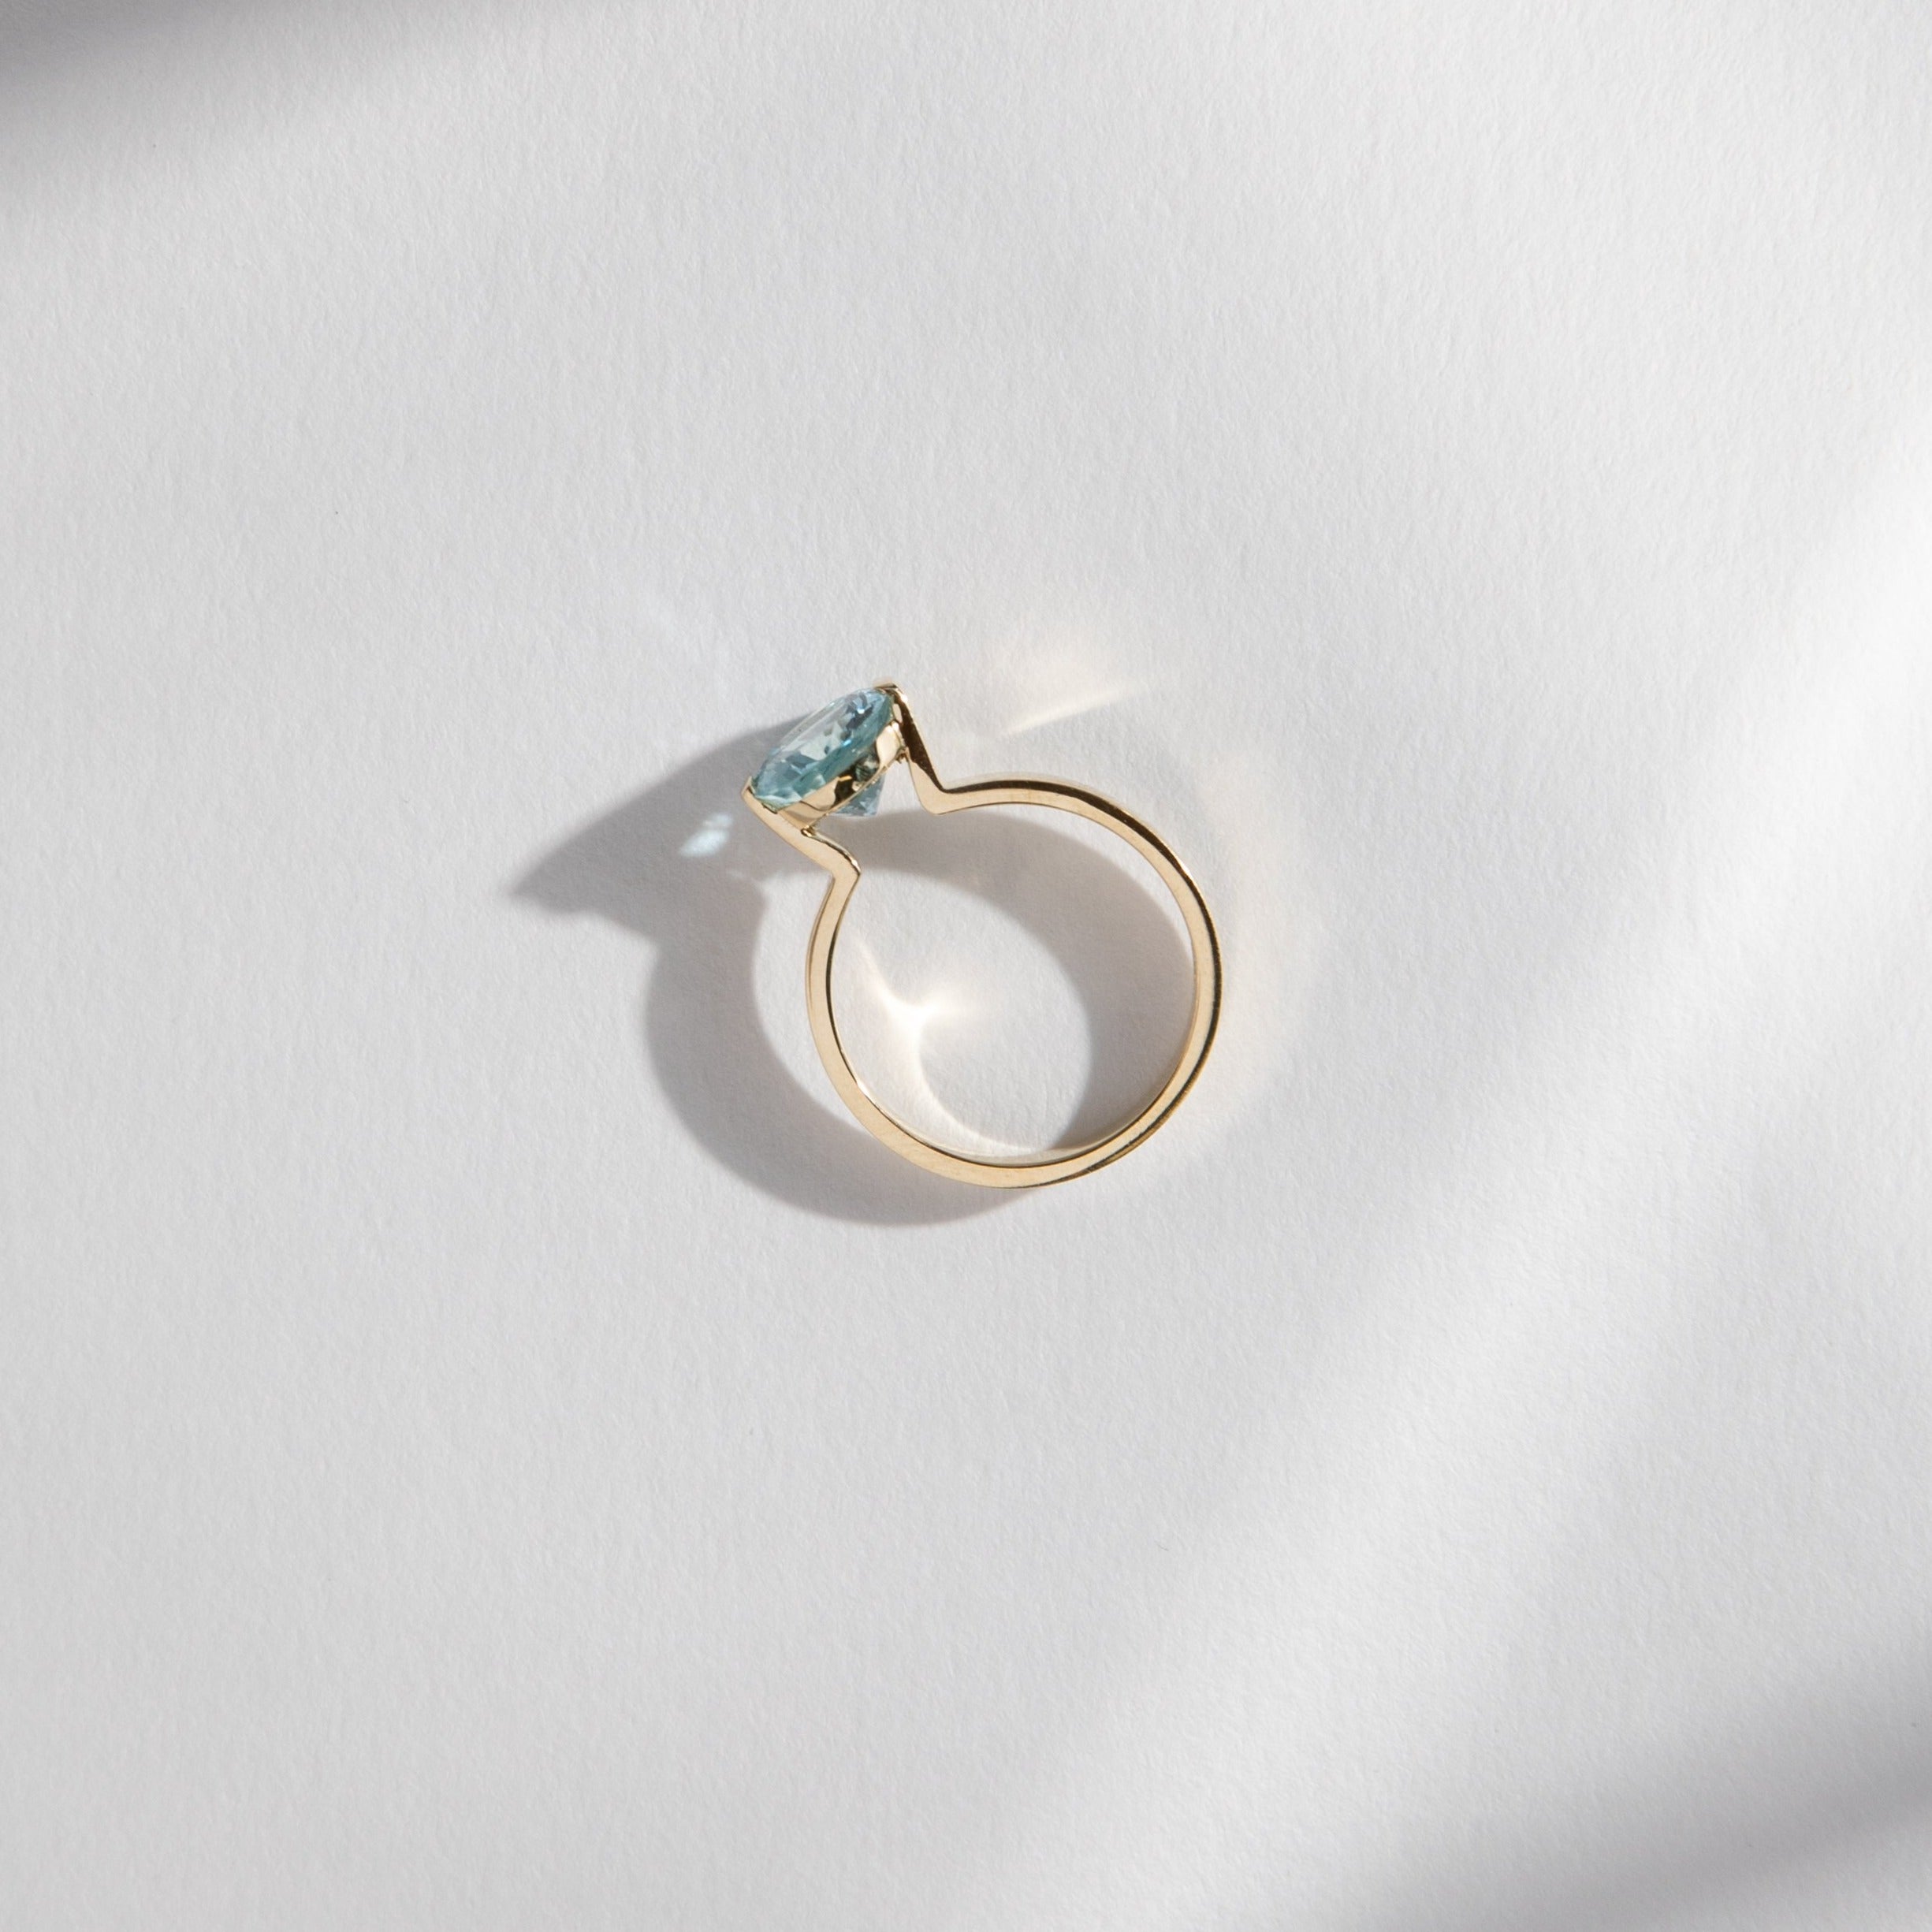 Silva MInimal Ring in 14k Gold set with a 2.07ct oval brilliant cut aquamarine By SHW Fine Jewelry NYC